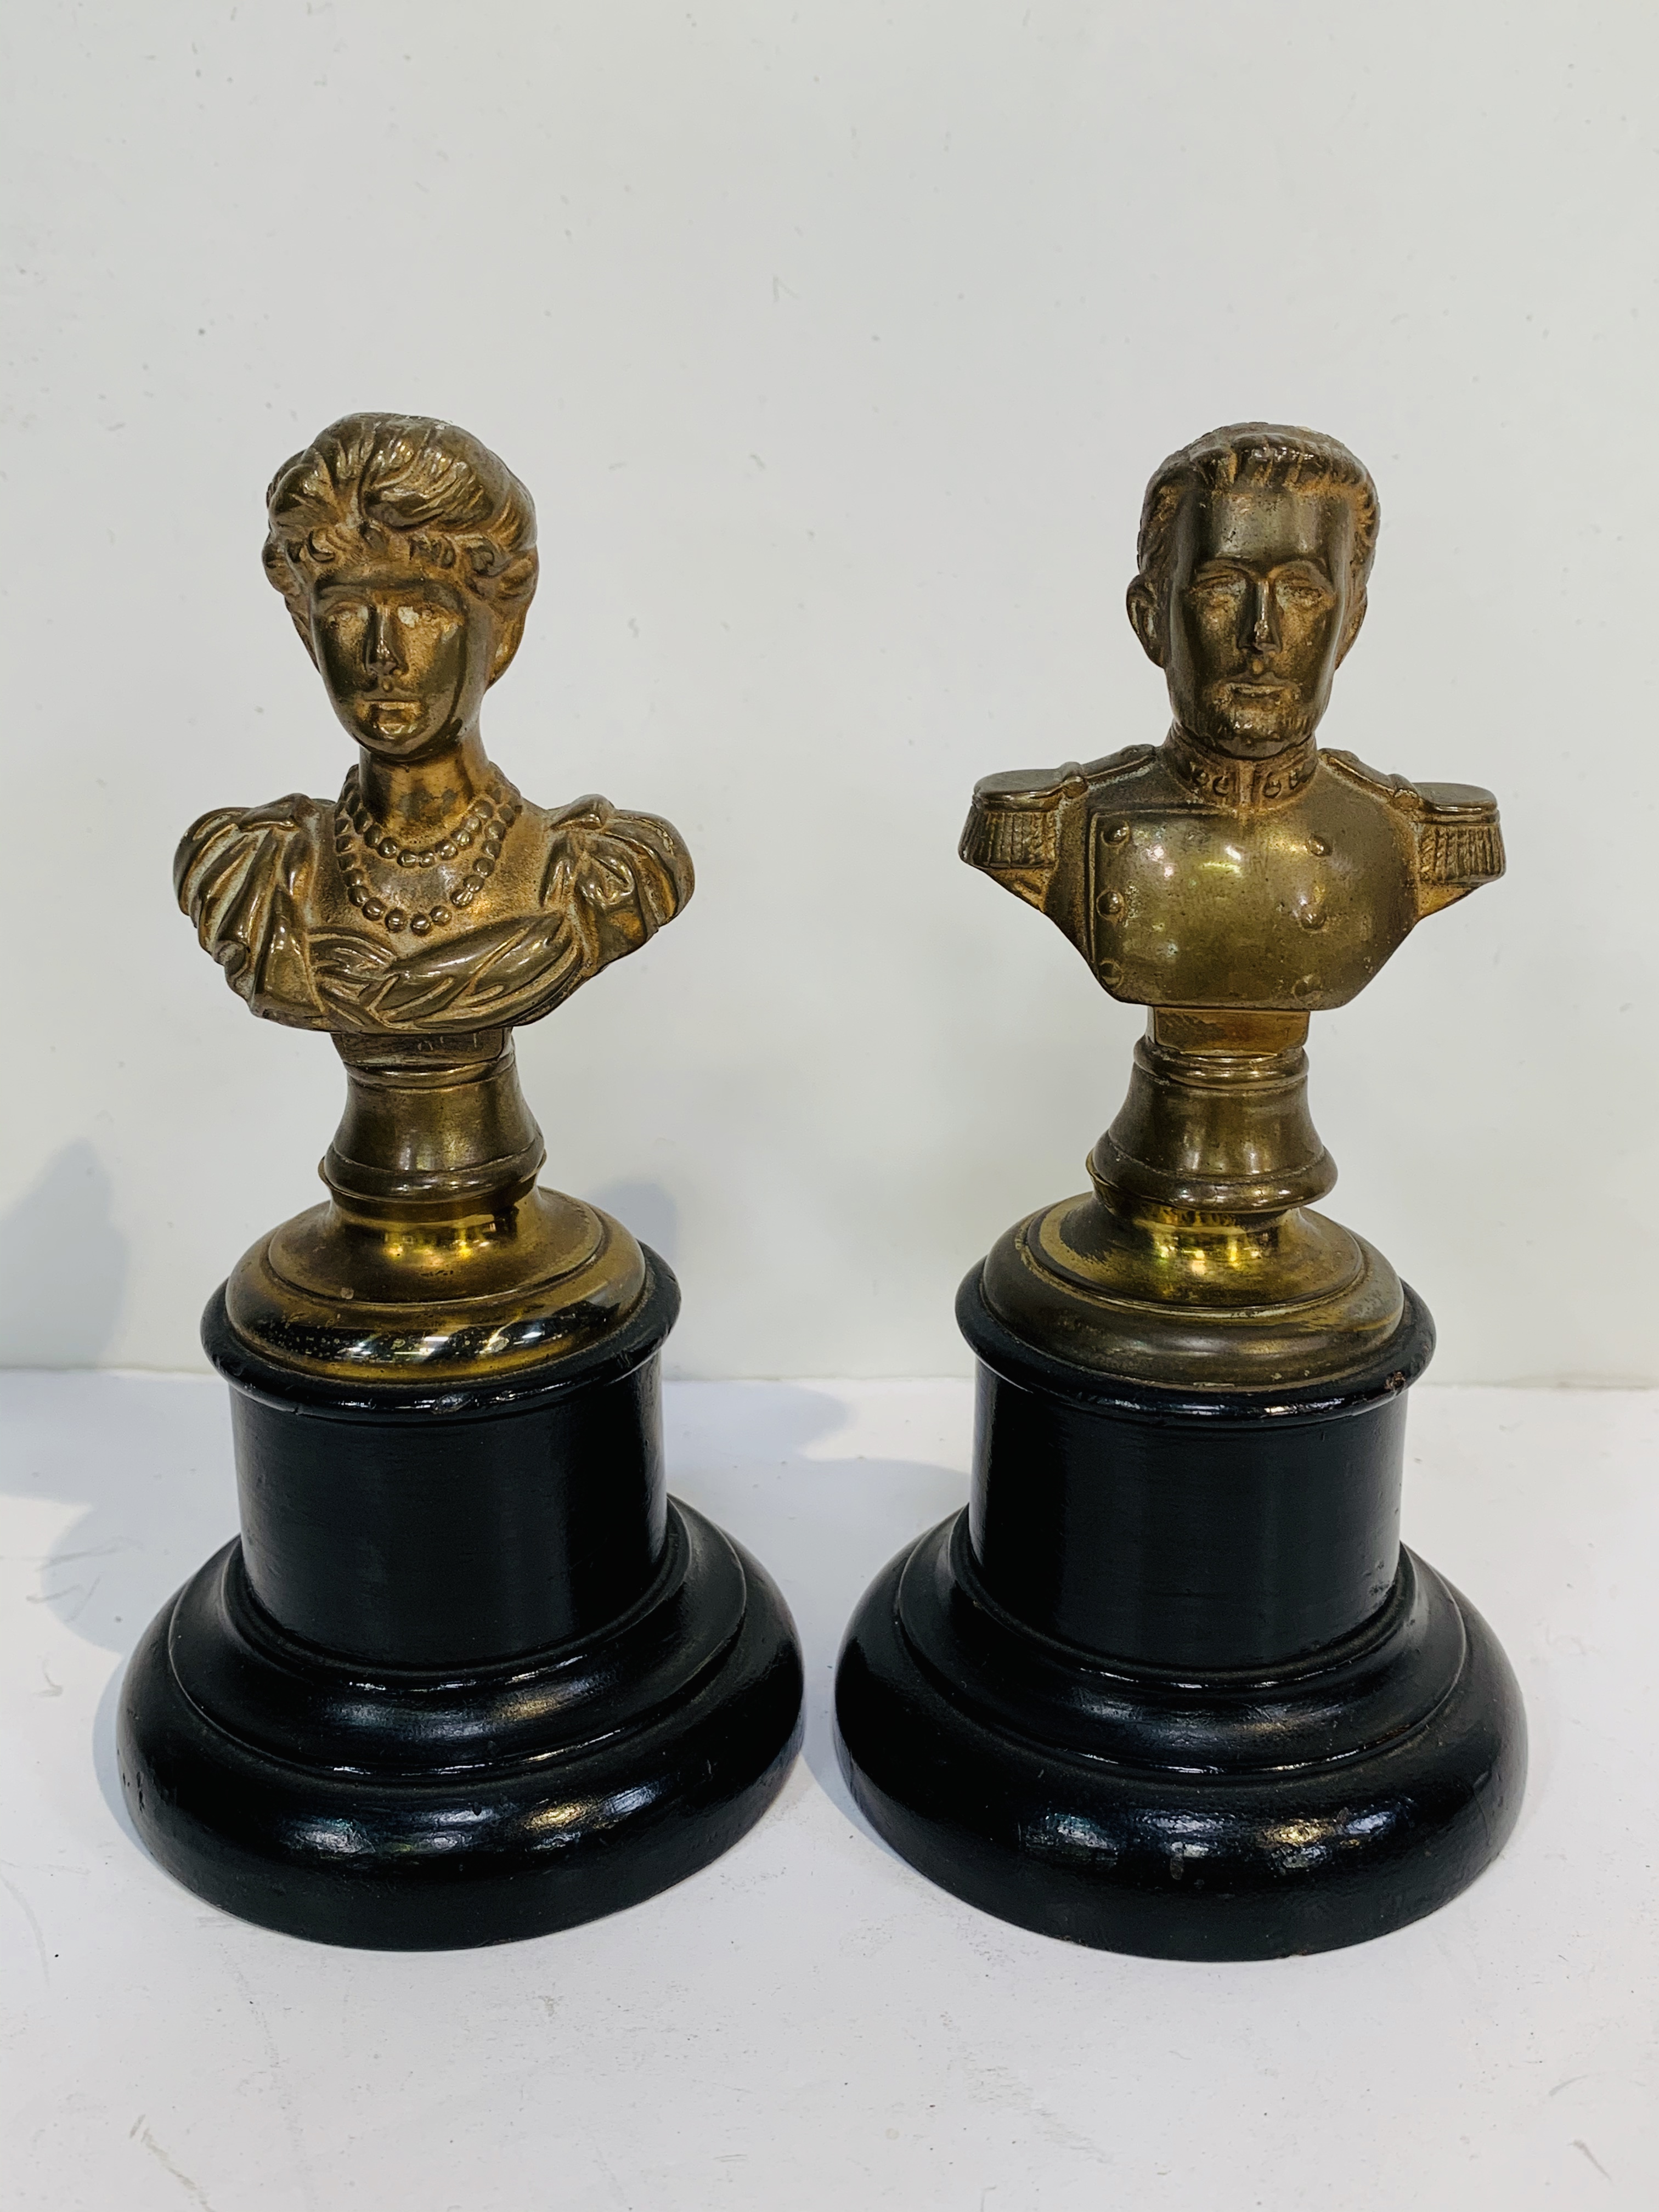 Pair of 19th century cast brass German historical busts. Height 14.5 cms.